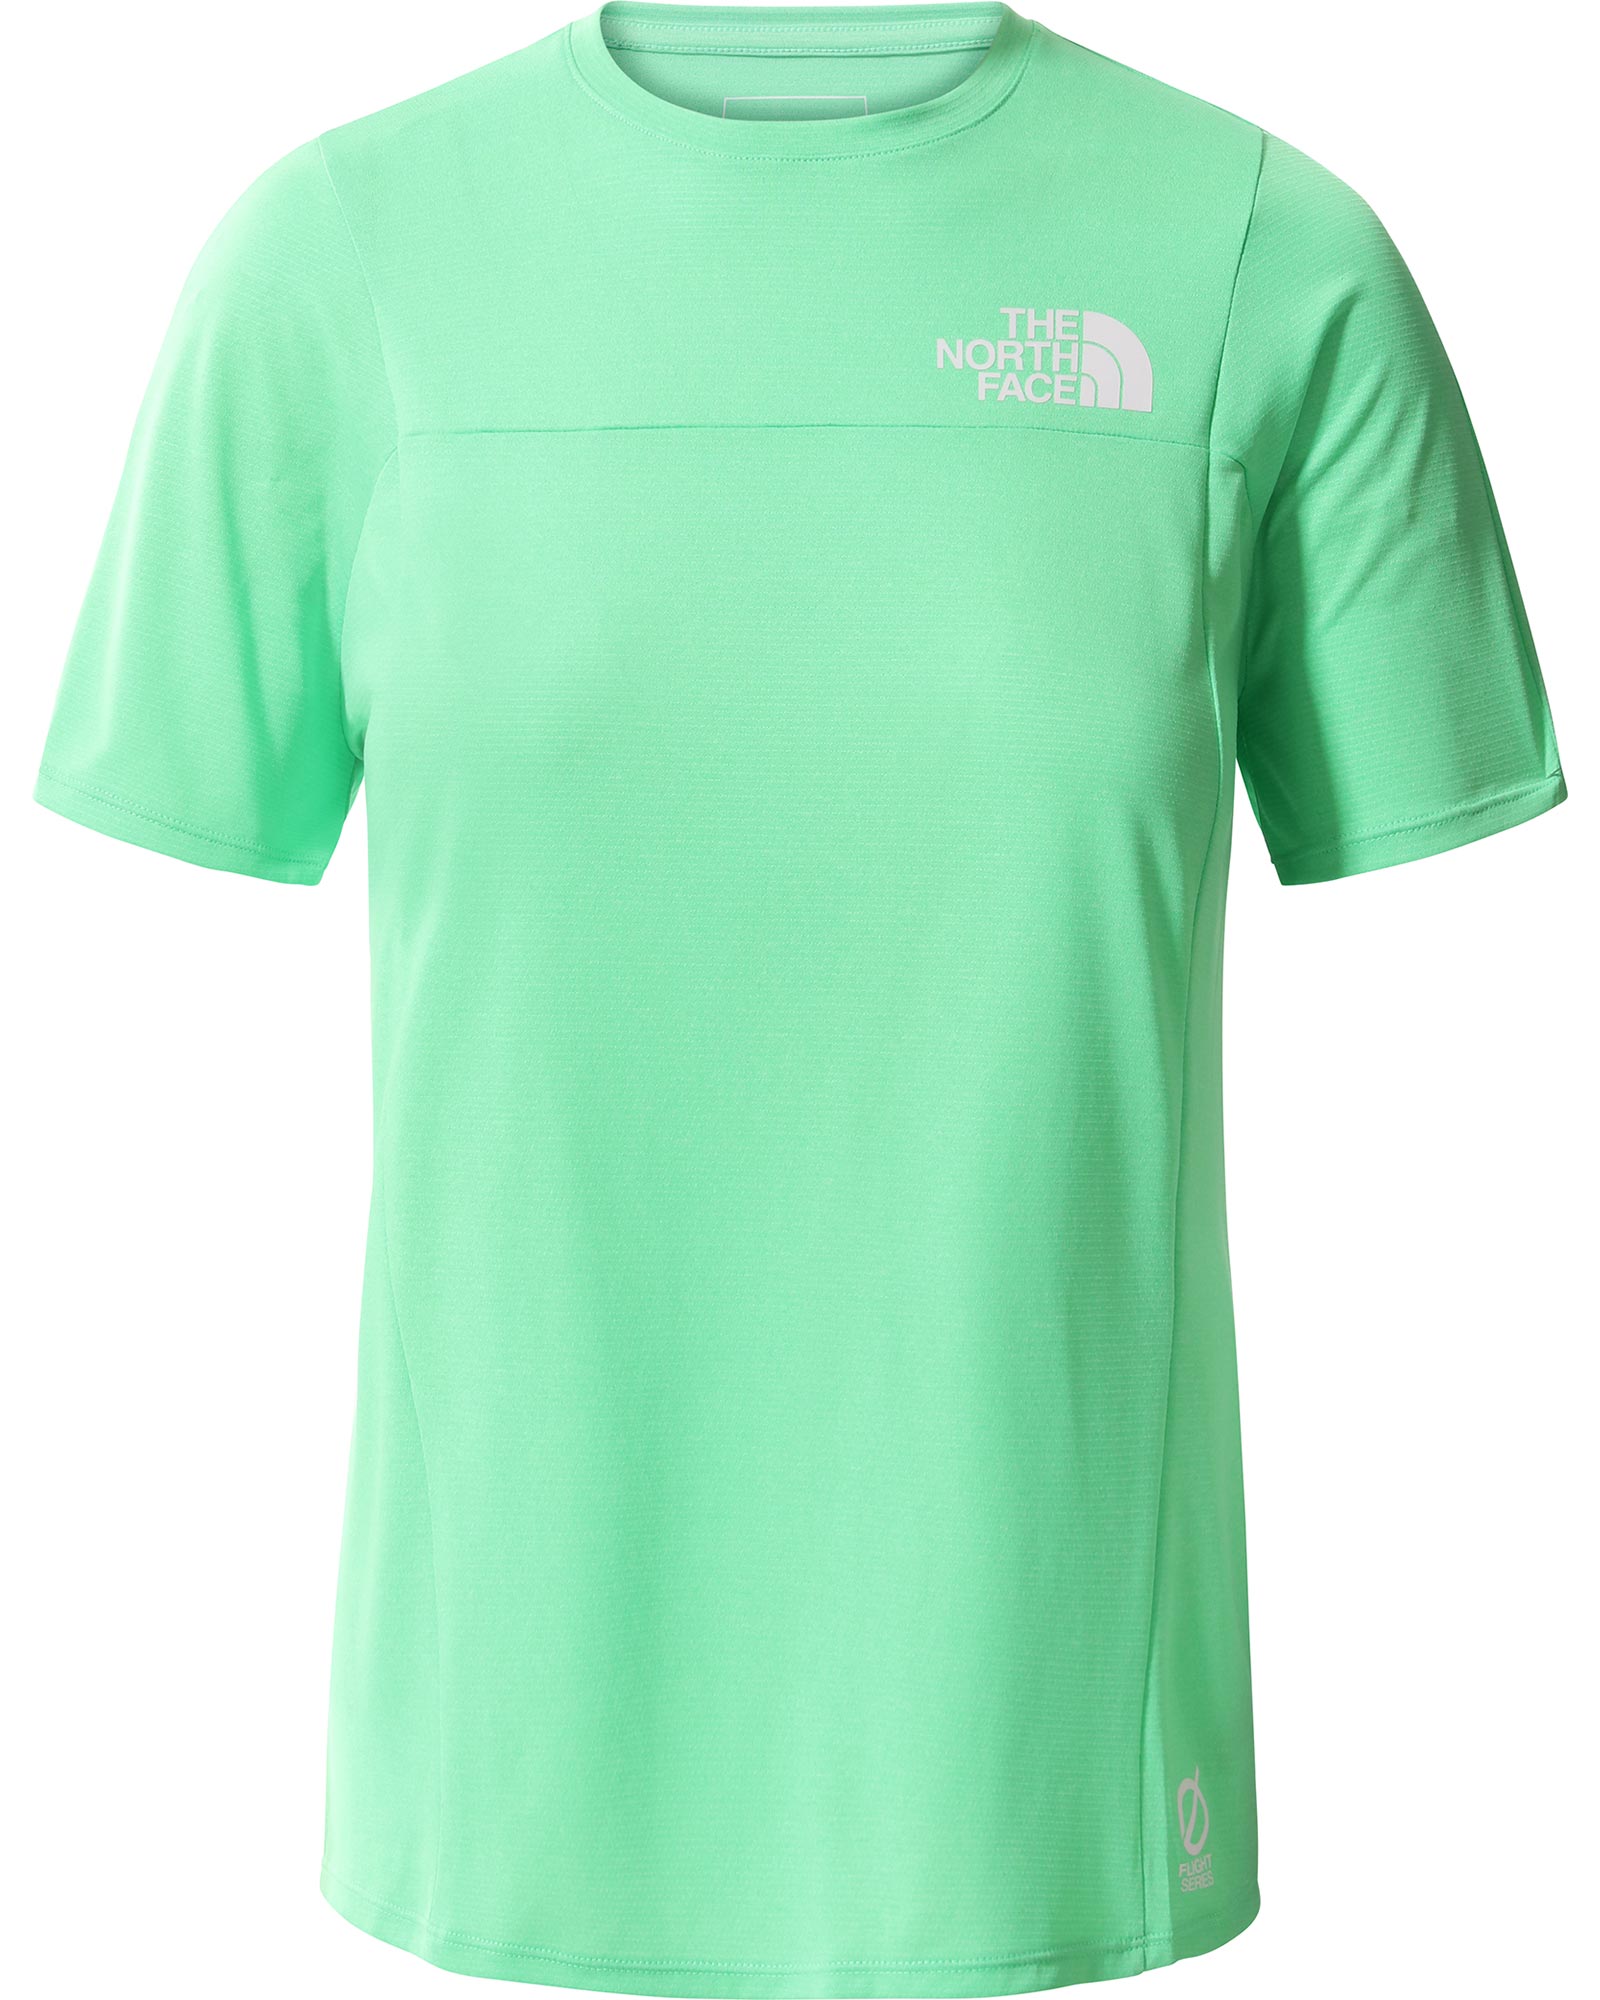 Product image of The North Face Flight Better Than Naked Women's T-Shirt